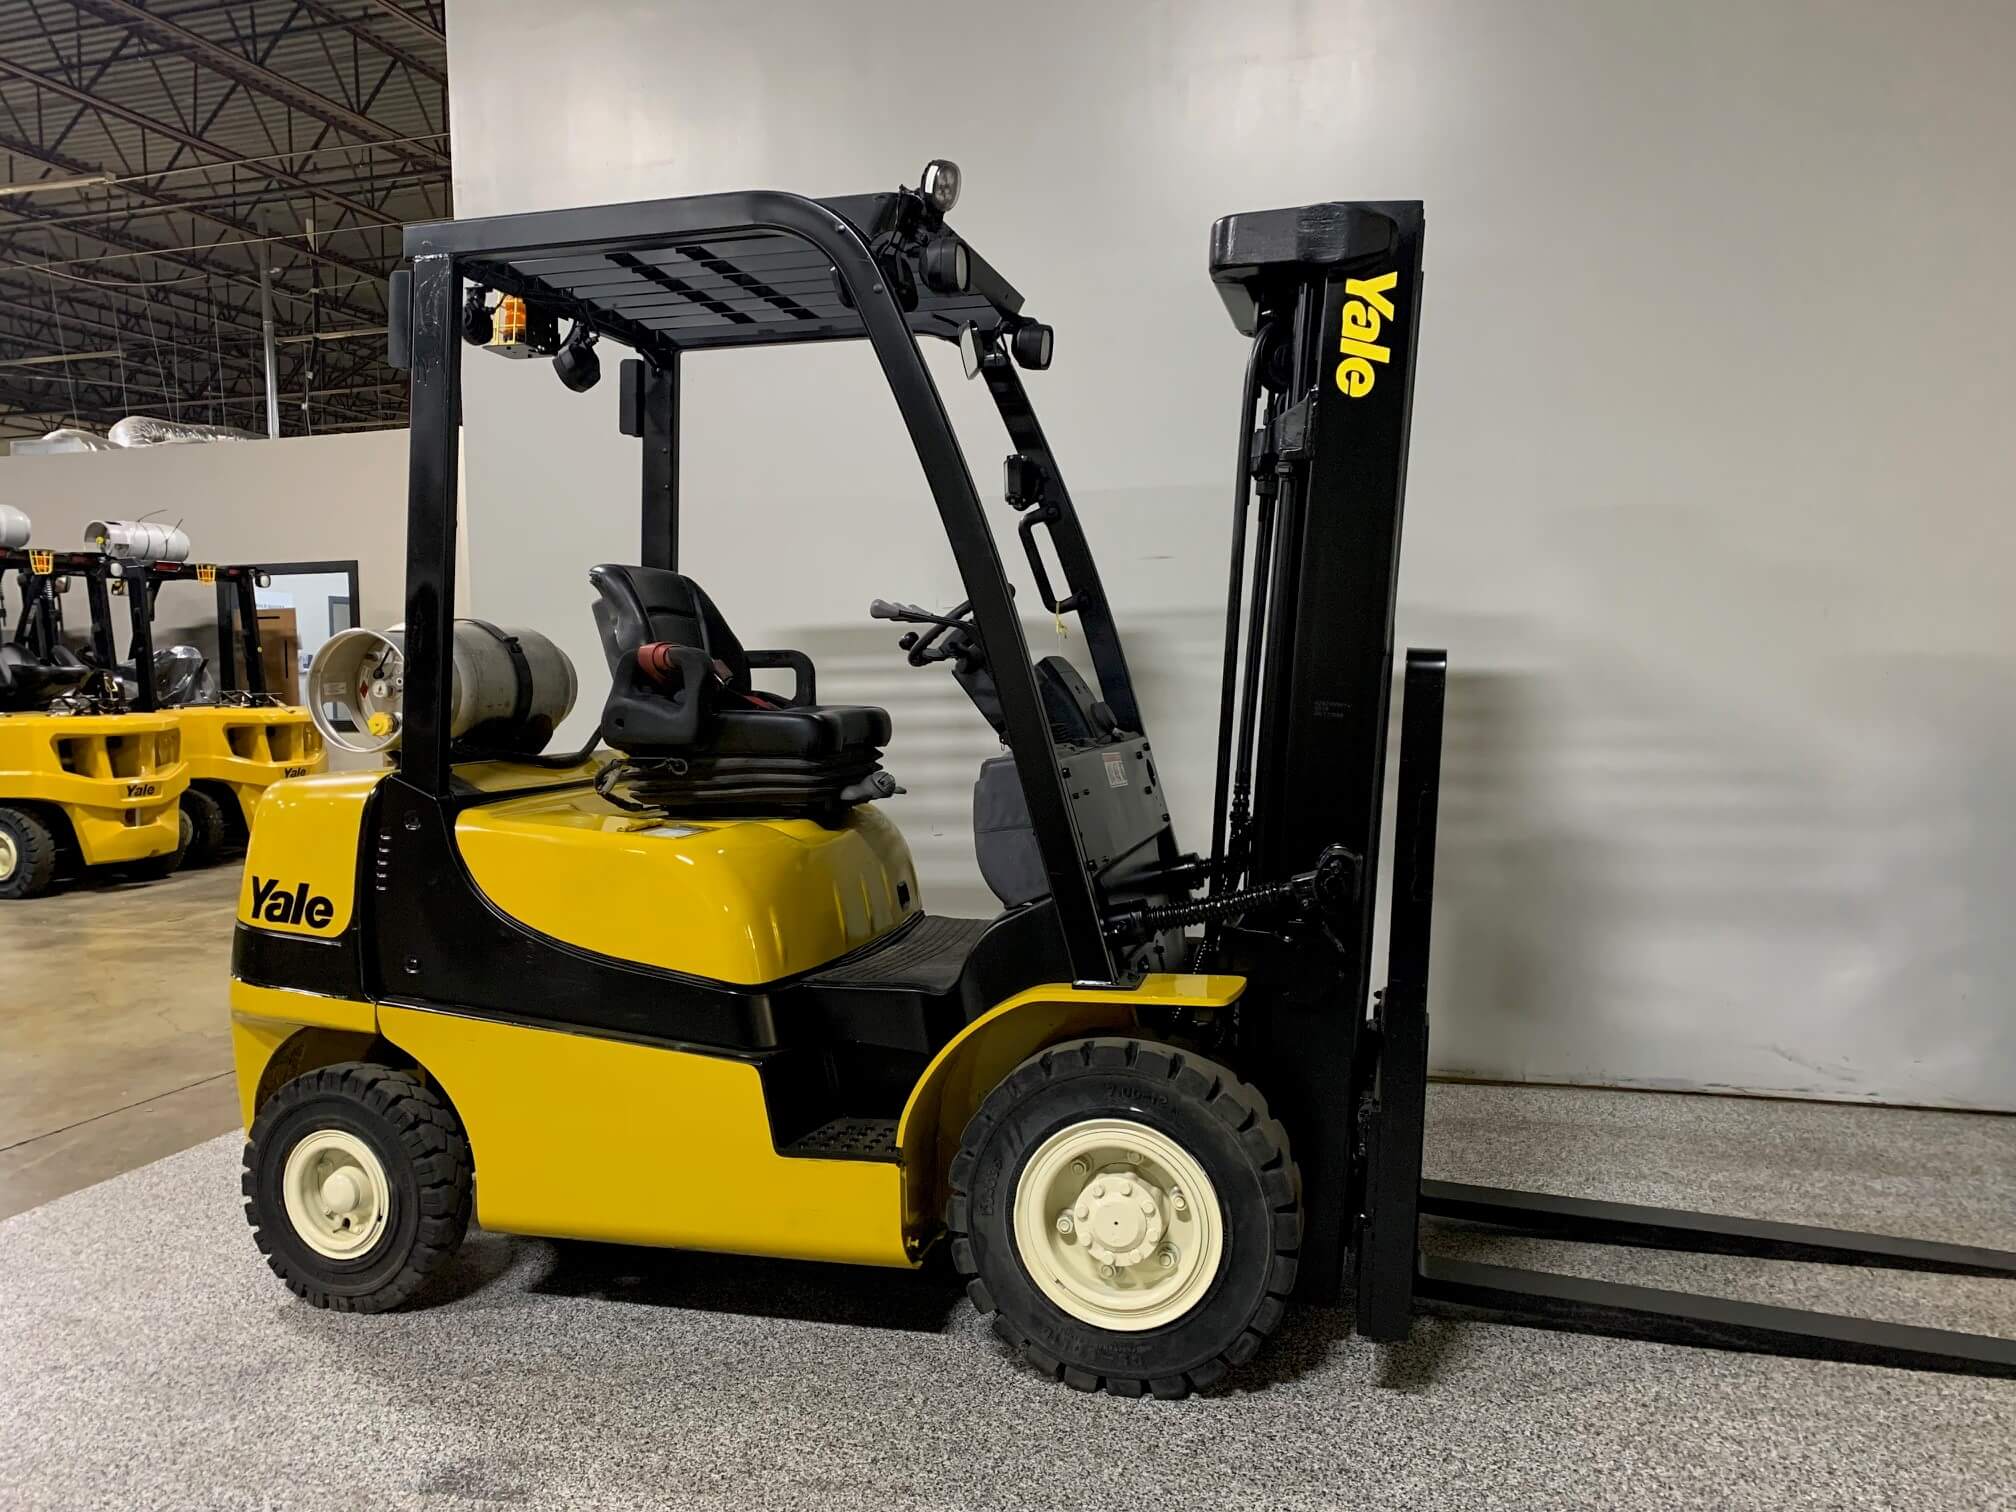 Forklifts for sale in Oklahoma City